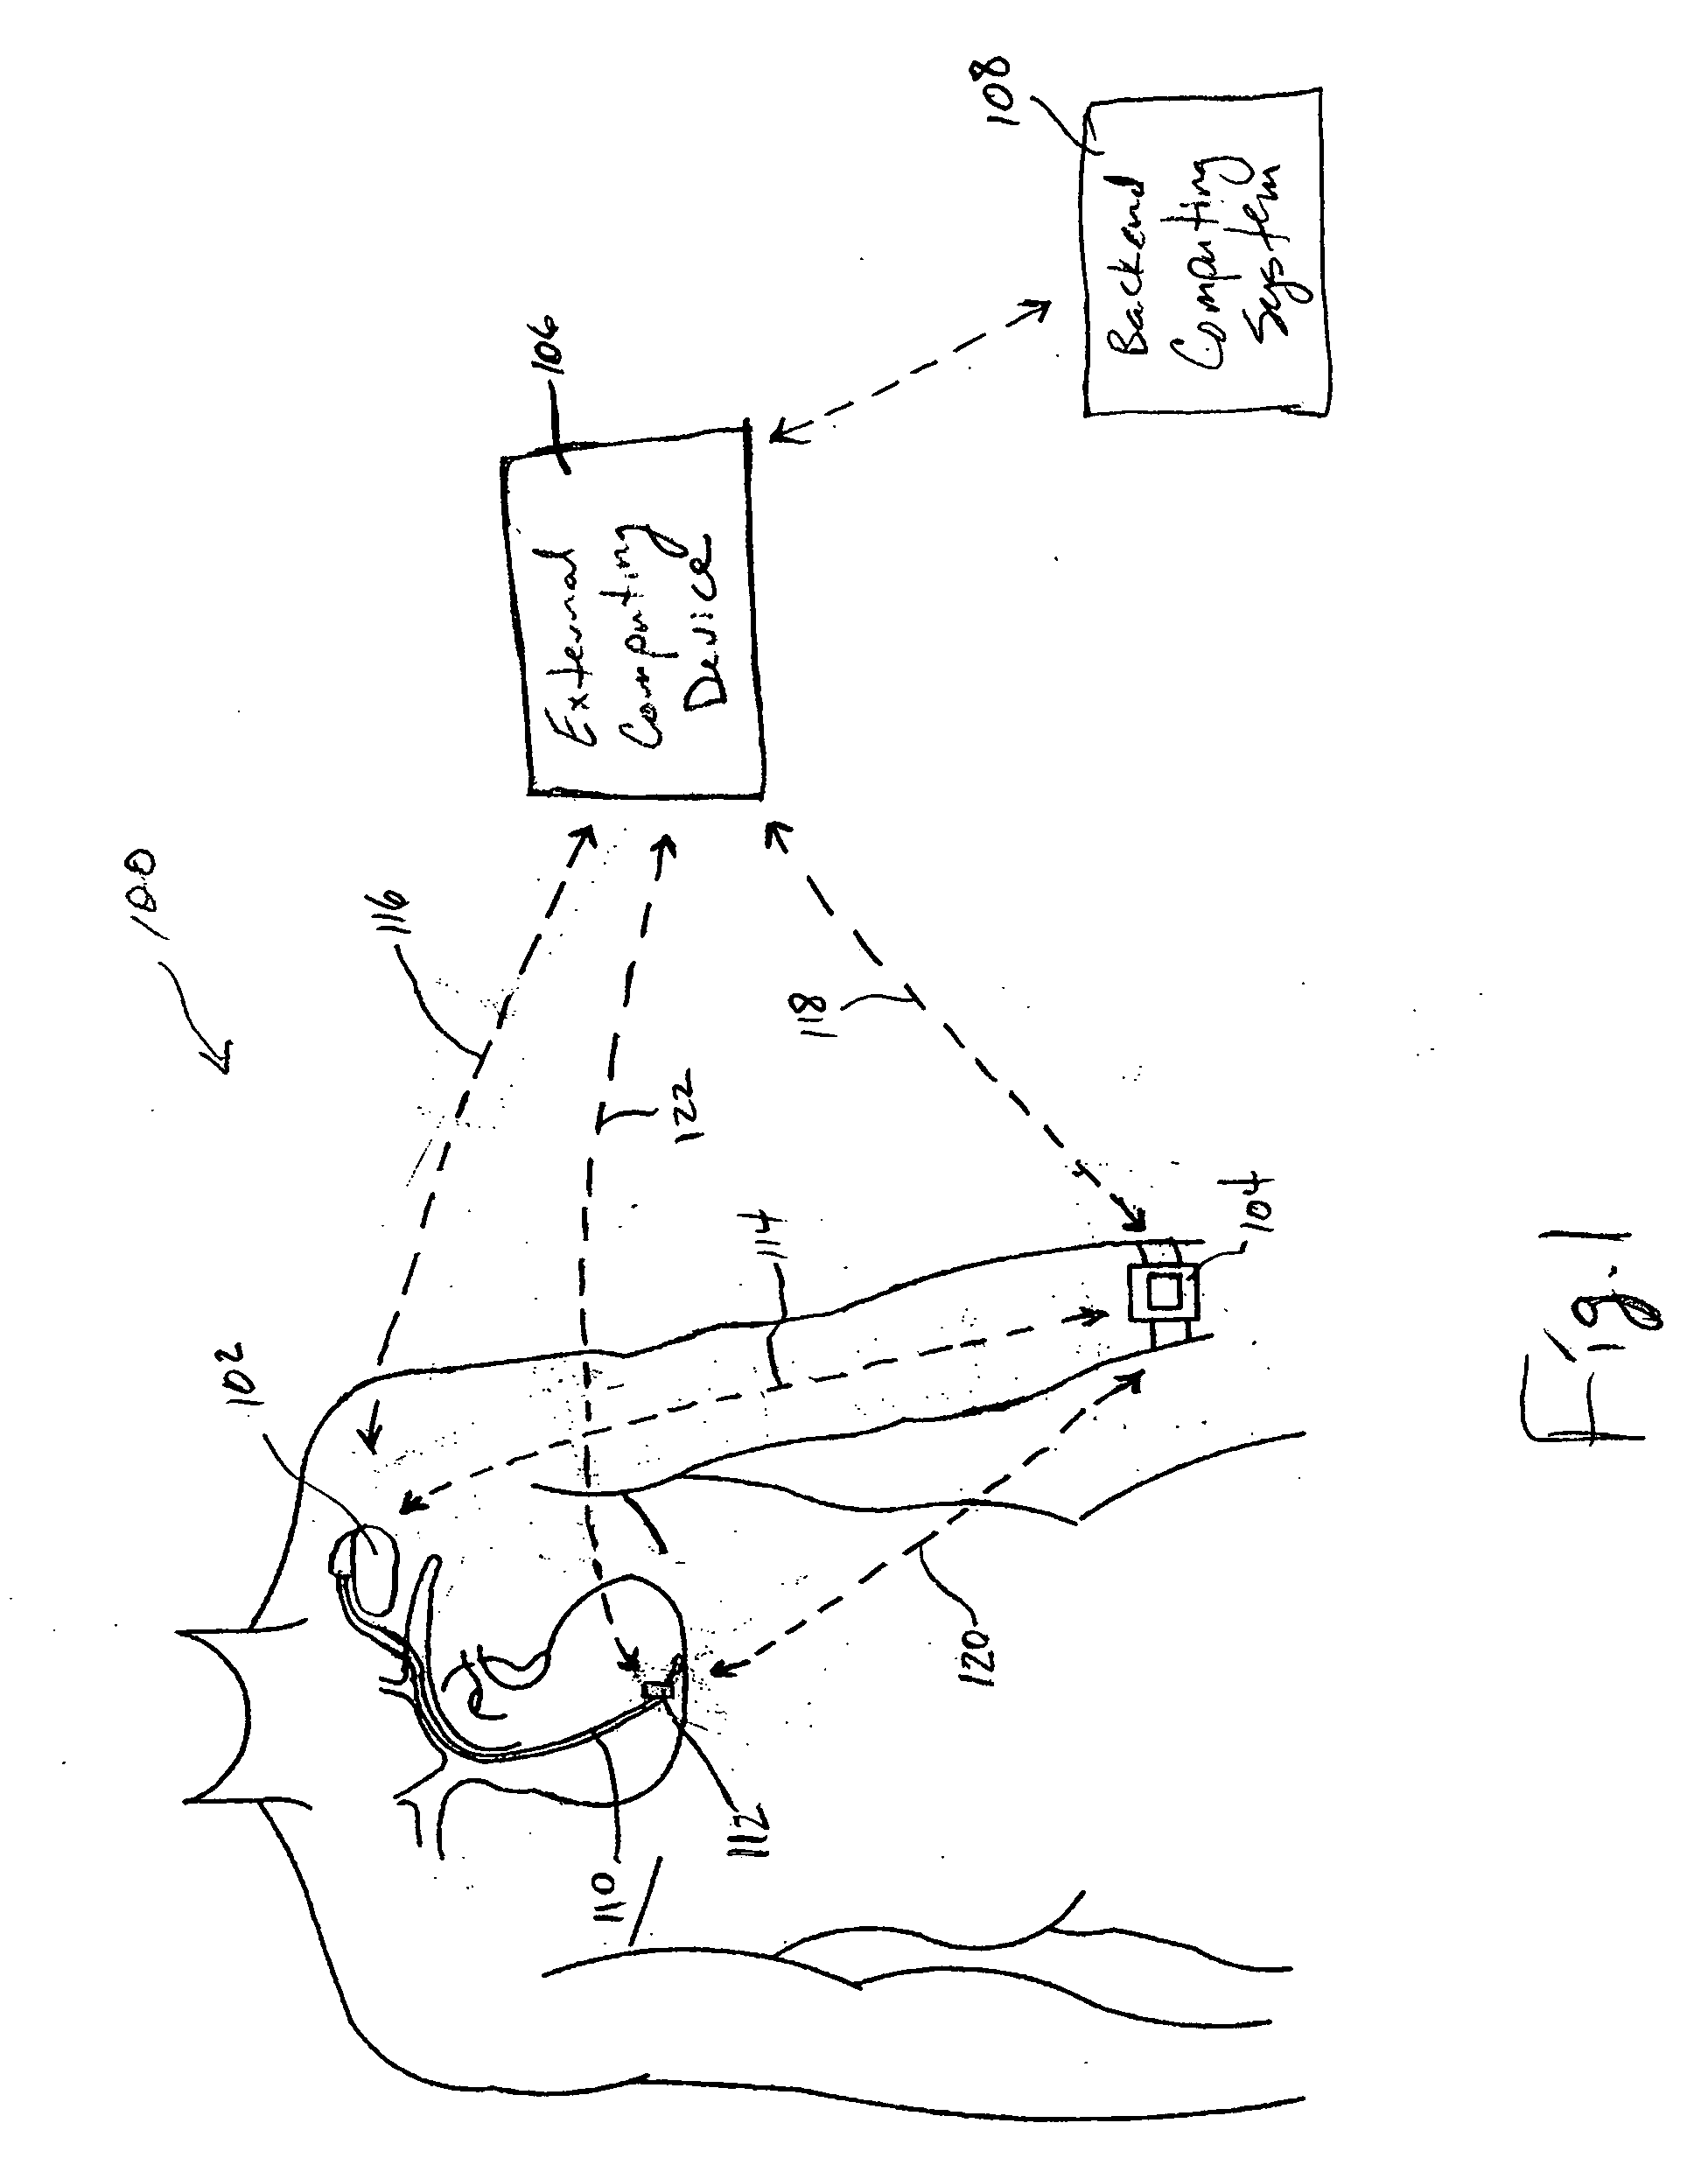 Systems and methods for deriving relative physiologic measurements